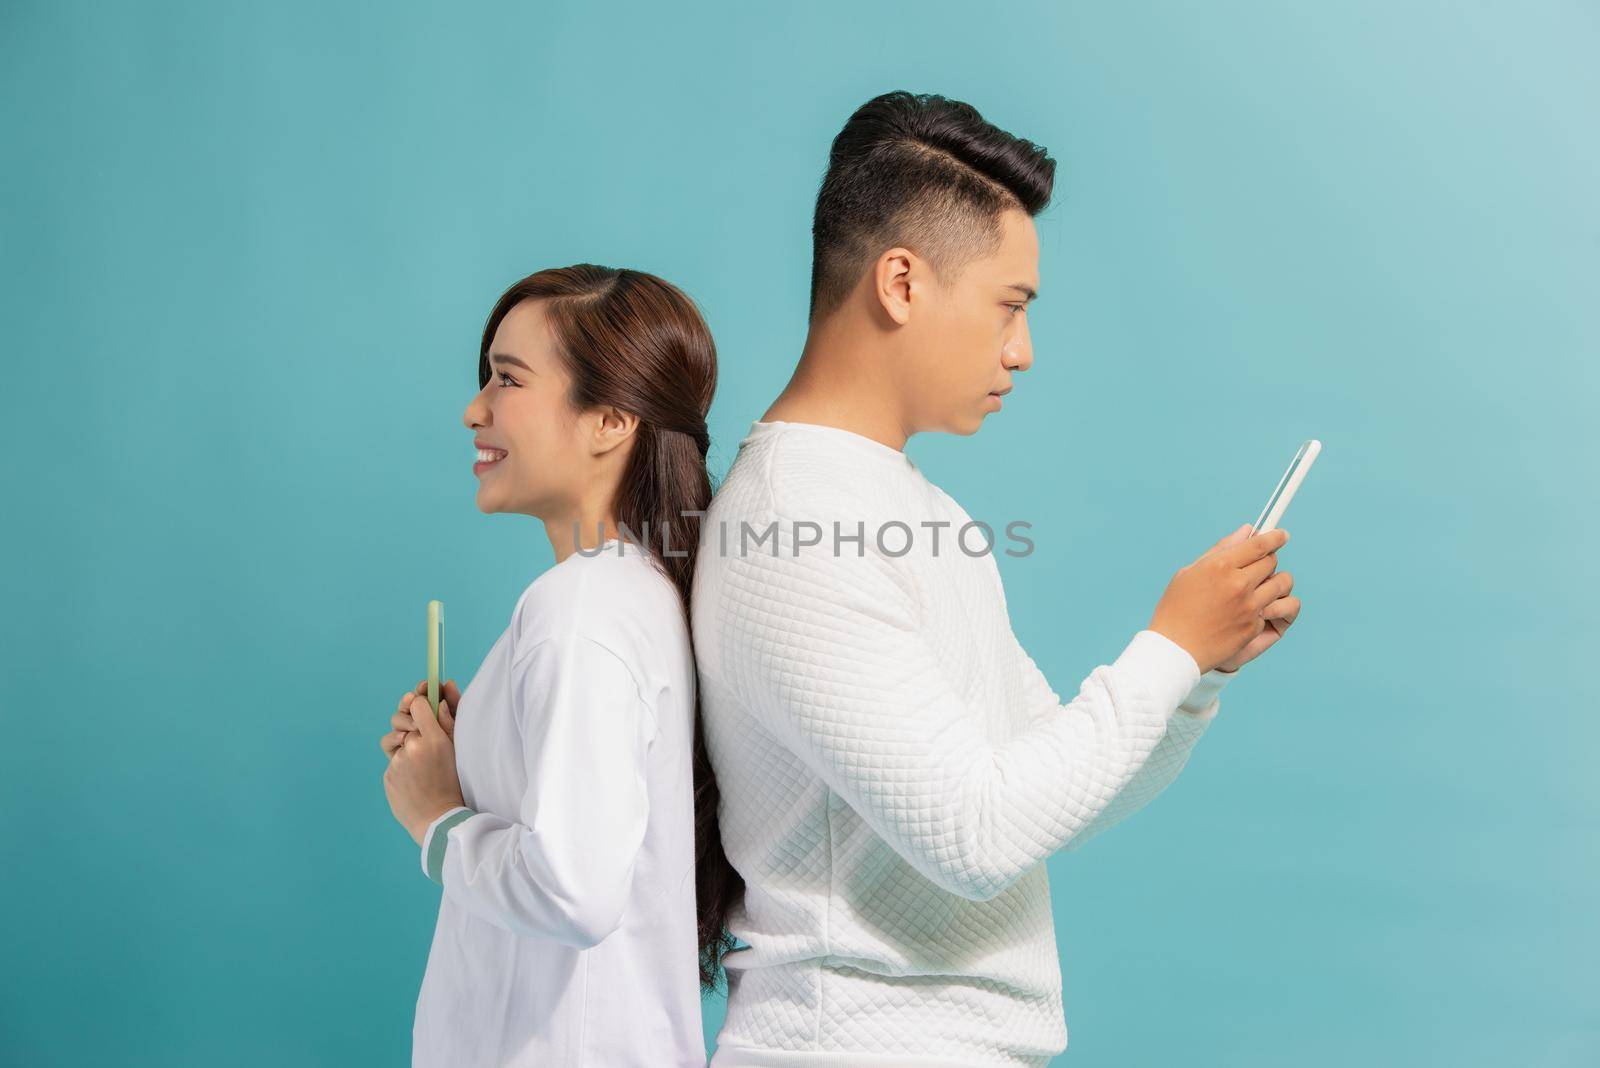 Distrust Concept. Beautiful young modern couple with smartphones in hands standing back to back.